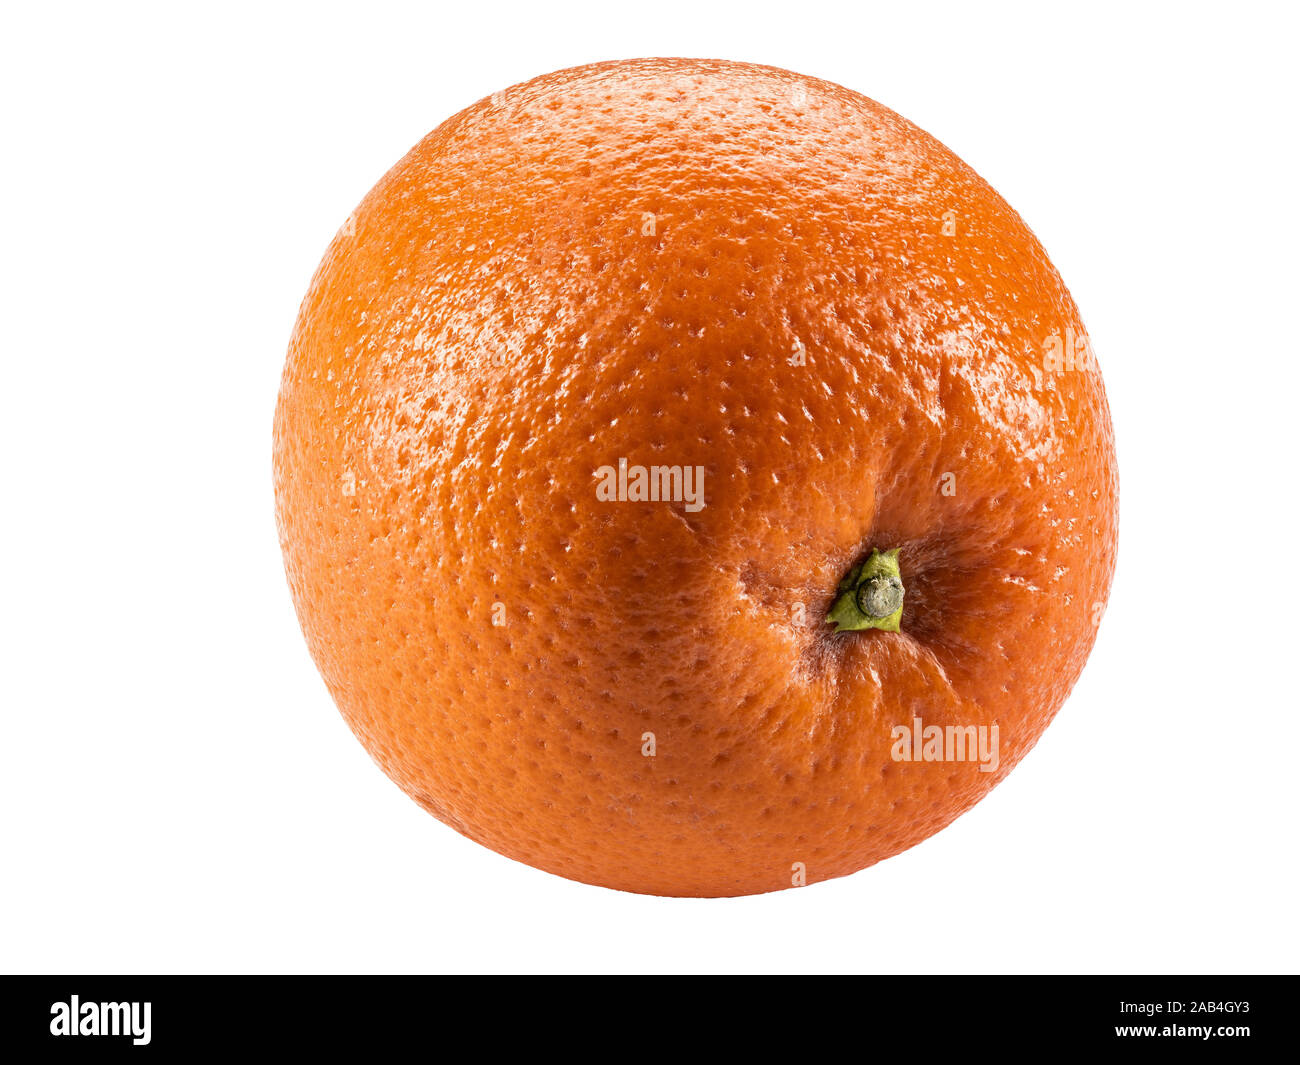 Ripe orange isolated on white background with copy space for text or images. Fruit with juicy flesh. Side view. Close-up shot. Stock Photo